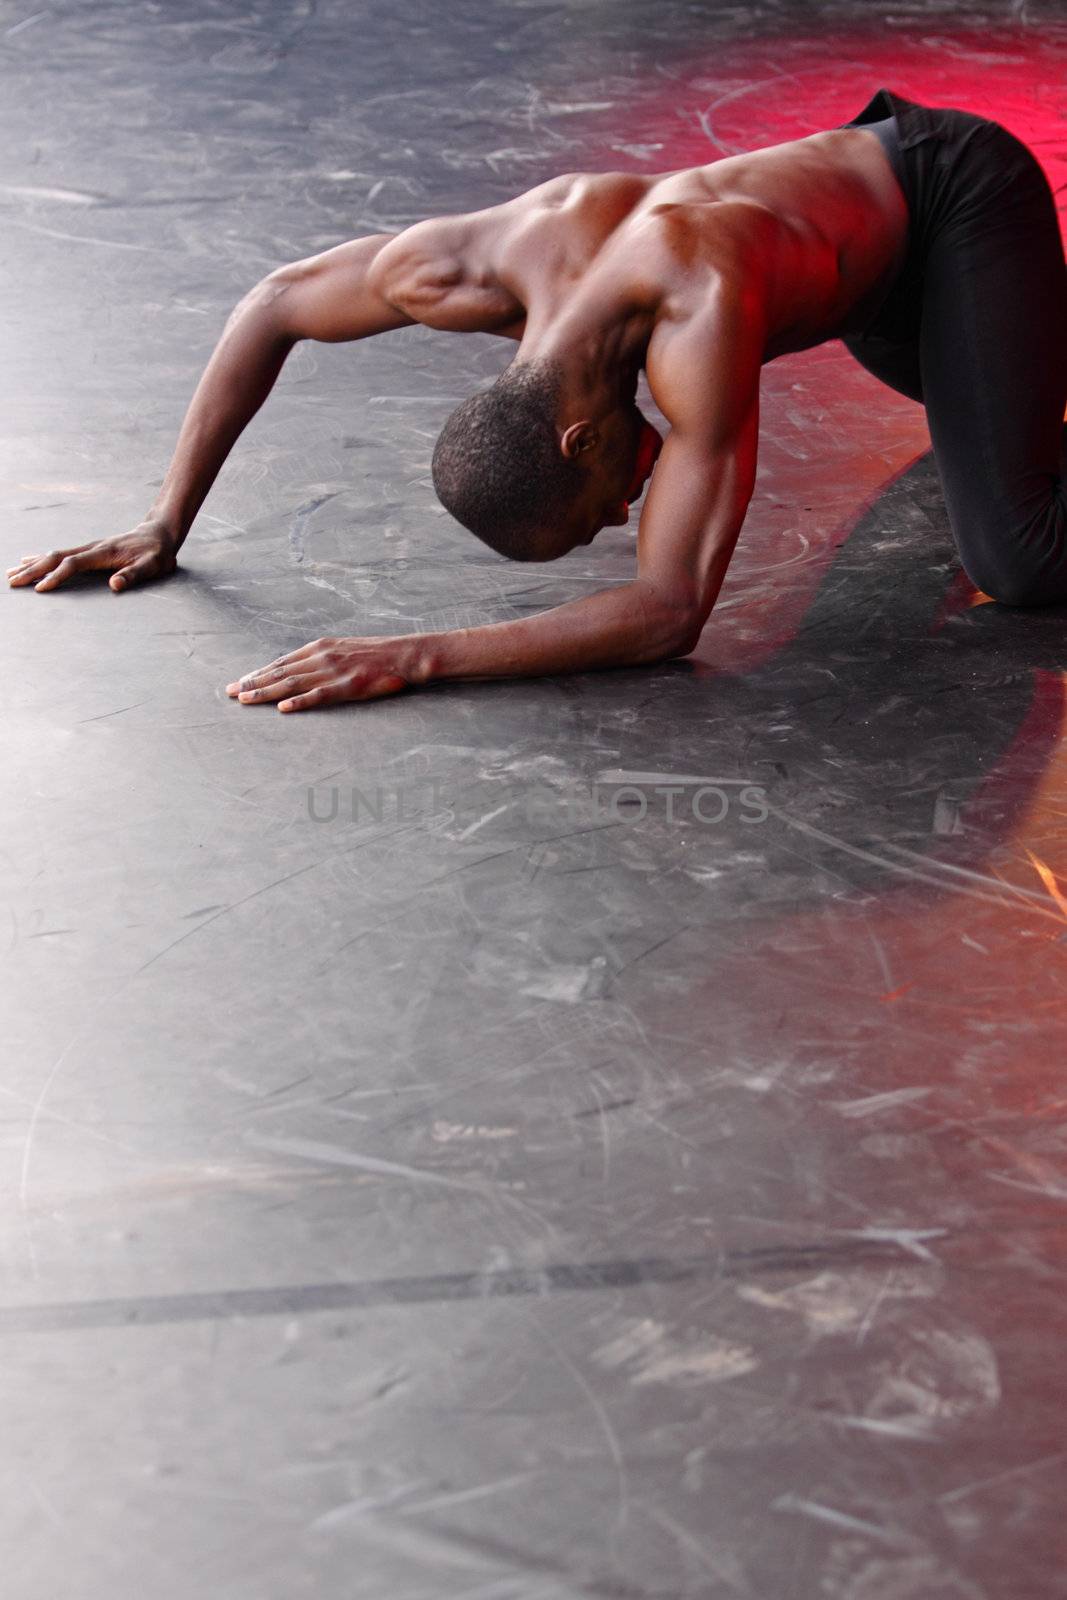 BRISTOL, ENGLAND - JULY 31: Samuel Roberts of the Alvin Ailey American Dance Theater performing ’Damn’ in the Dance Village at the Harbour Festival in Bristol, England on July 31, 2010